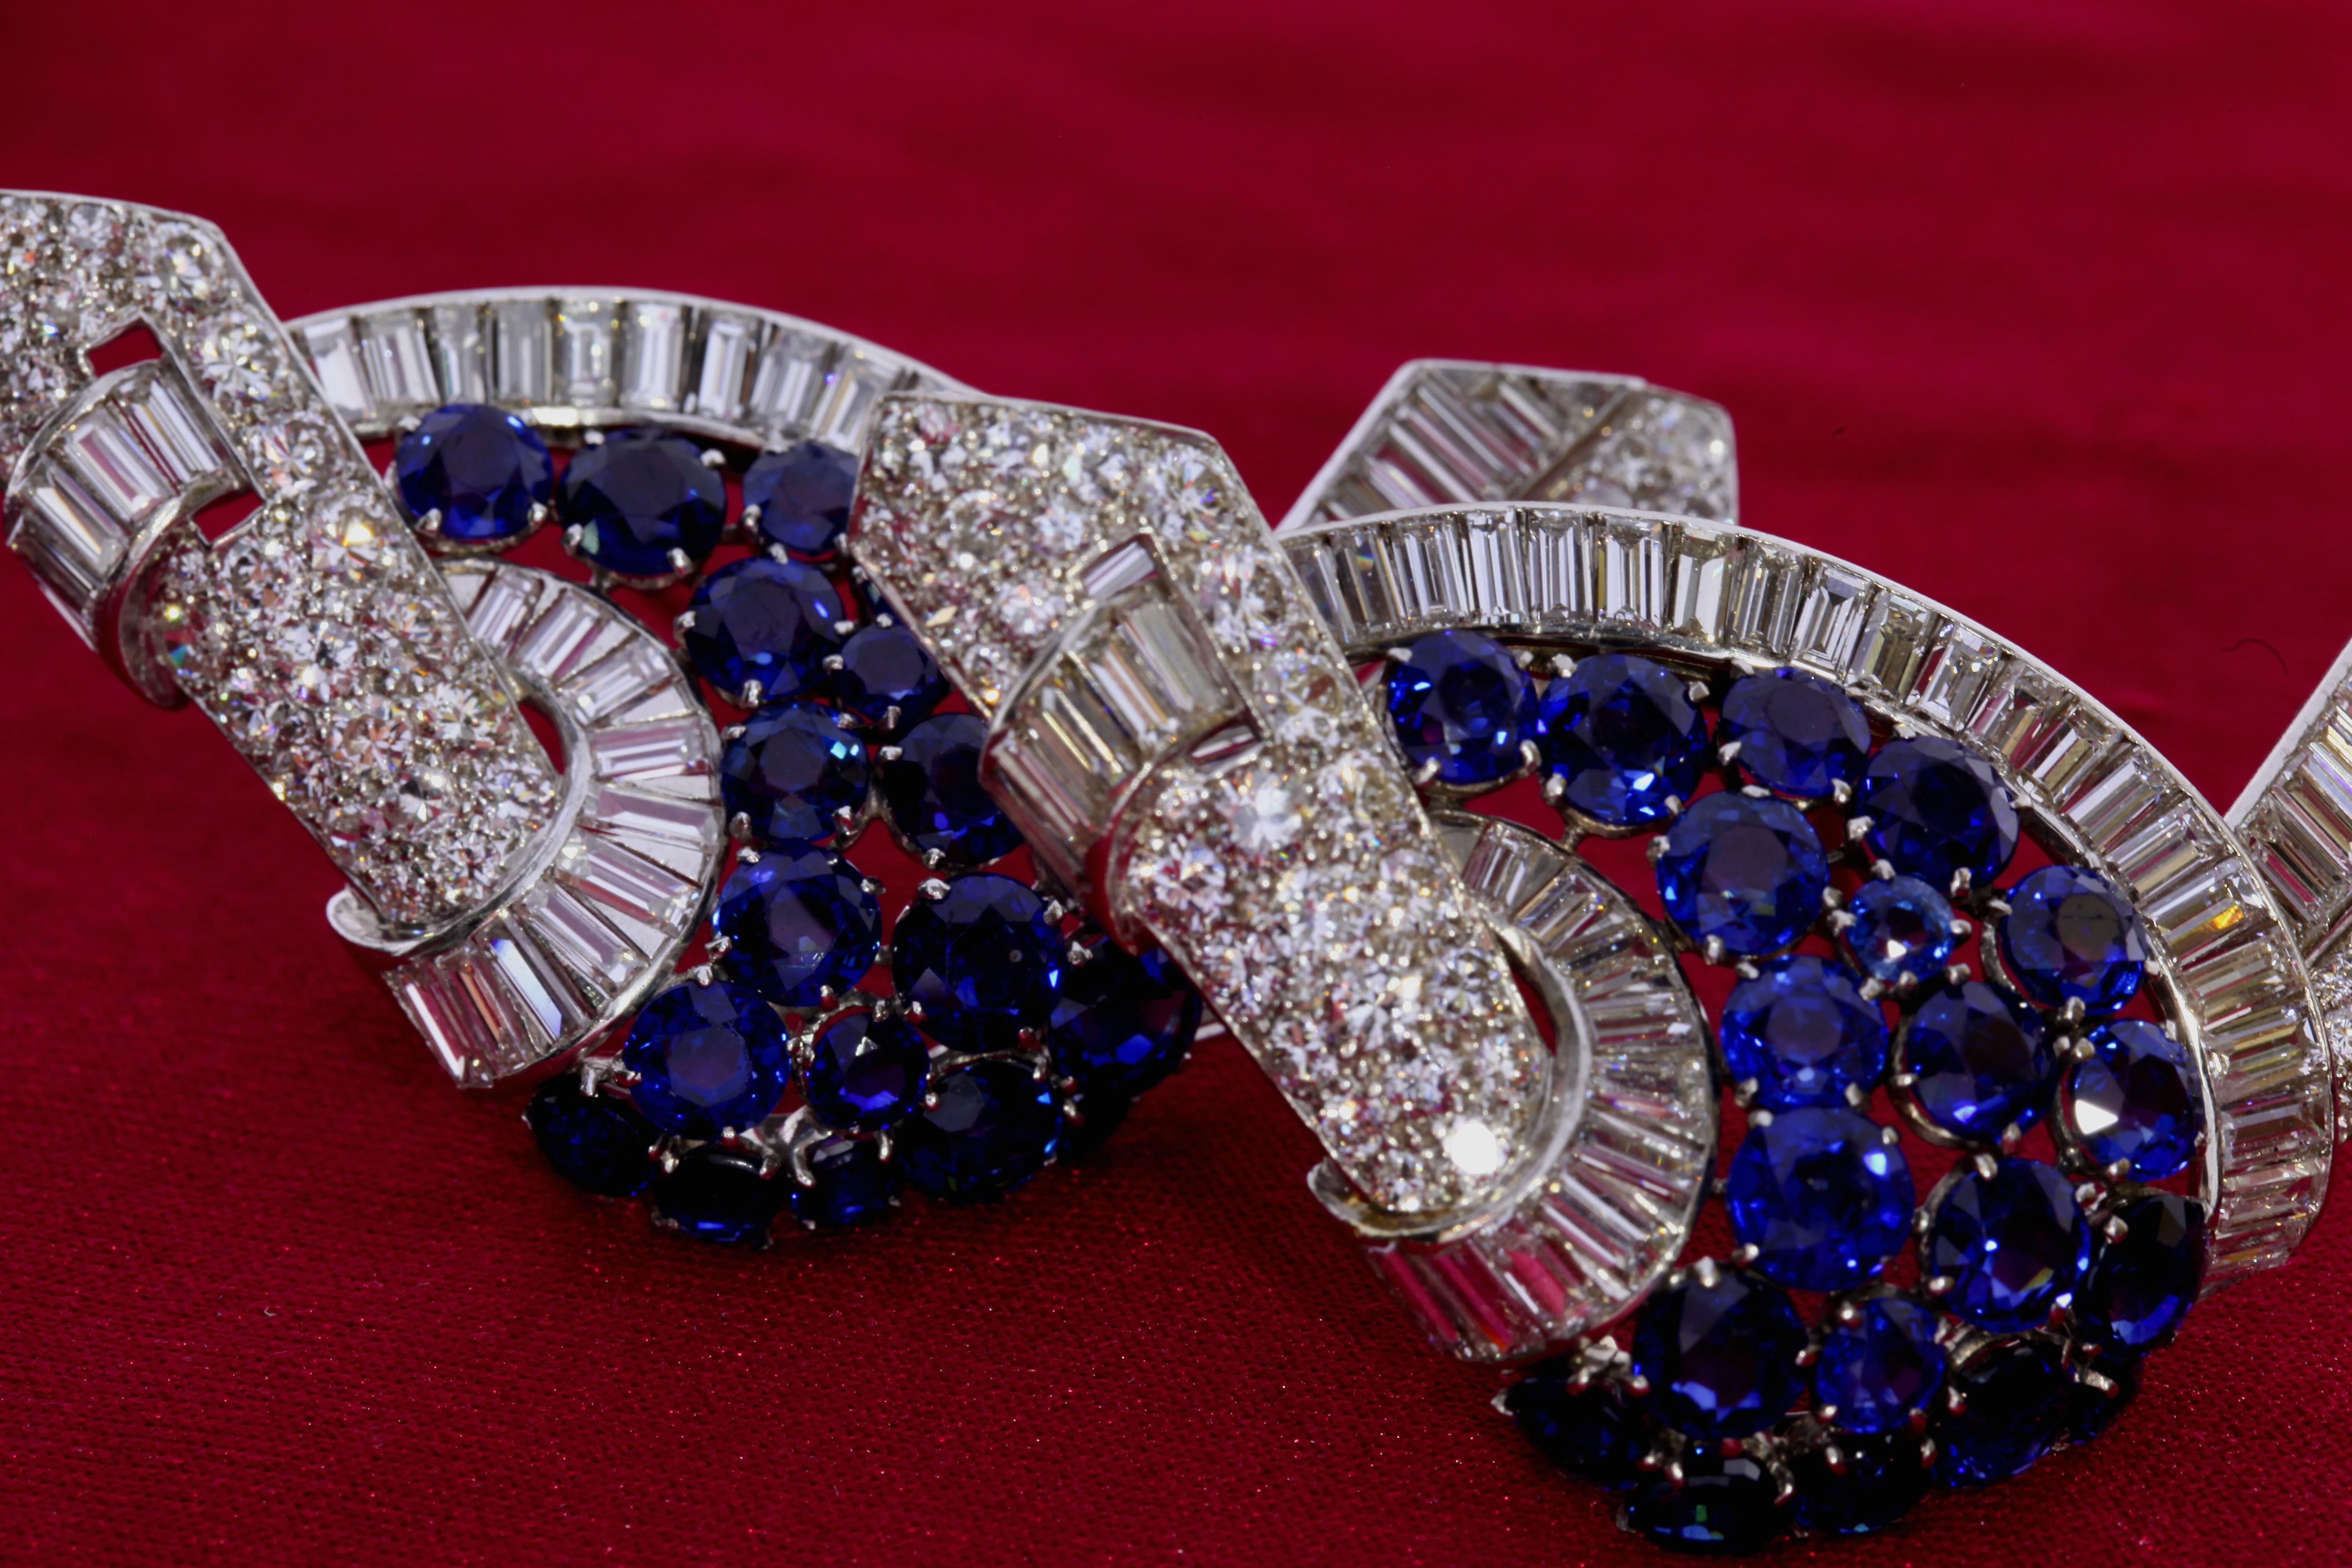 Art Deco Platinum Brooch with Diamonds and Sapphires from circa 1935 im Zustand „Gut“ im Angebot in New York, NY